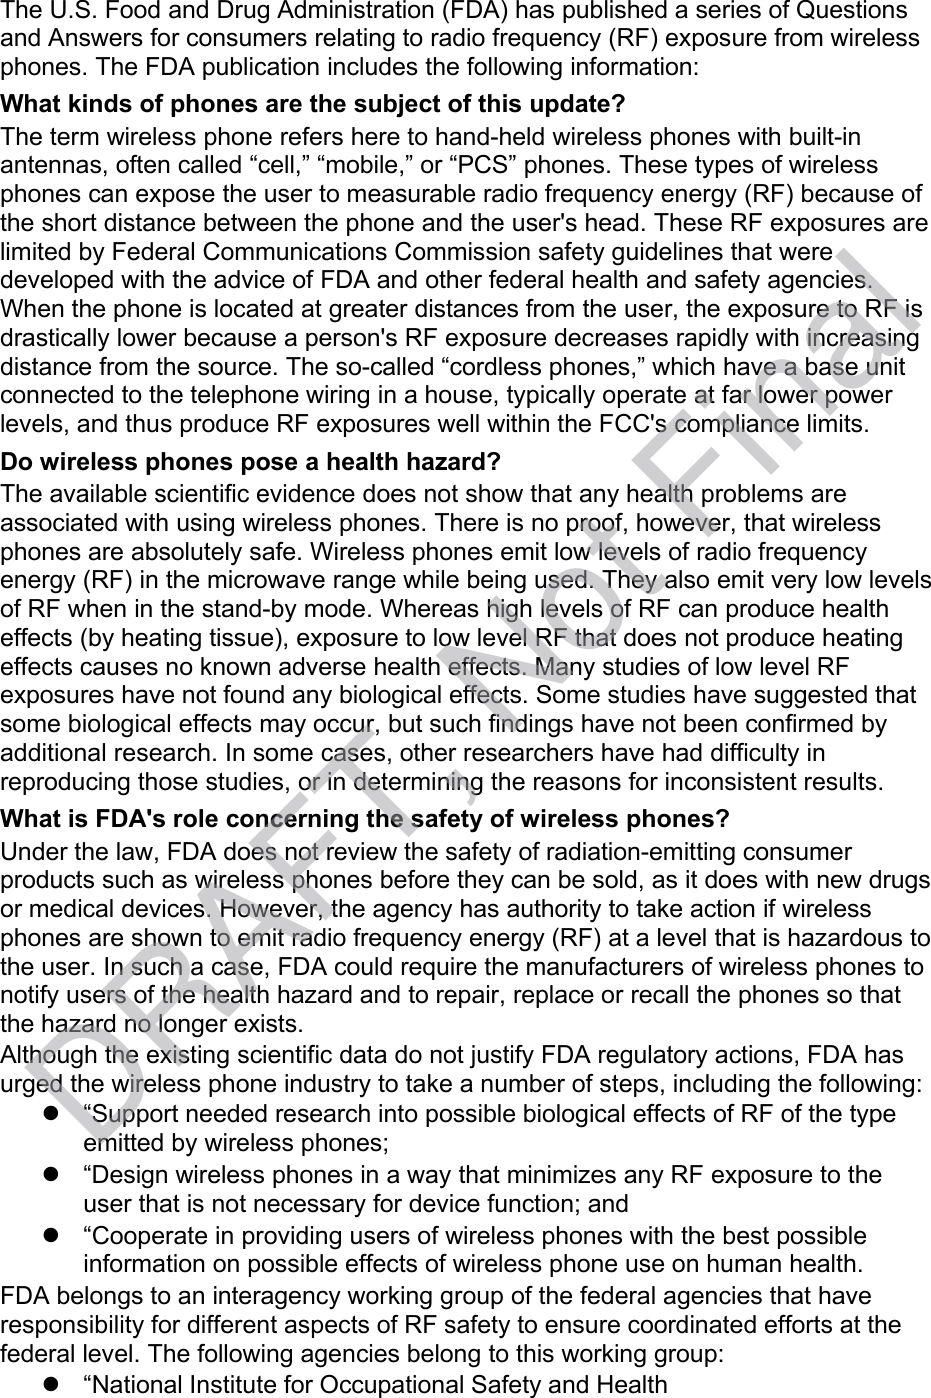 The U.S. Food and Drug Administration (FDA) has published a series of Questions and Answers for consumers relating to radio frequency (RF) exposure from wireless phones. The FDA publication includes the following information: What kinds of phones are the subject of this update? The term wireless phone refers here to hand-held wireless phones with built-in antennas, often called “cell,” “mobile,” or “PCS” phones. These types of wireless phones can expose the user to measurable radio frequency energy (RF) because of the short distance between the phone and the user&apos;s head. These RF exposures are limited by Federal Communications Commission safety guidelines that were developed with the advice of FDA and other federal health and safety agencies. When the phone is located at greater distances from the user, the exposure to RF is drastically lower because a person&apos;s RF exposure decreases rapidly with increasing distance from the source. The so-called “cordless phones,” which have a base unit connected to the telephone wiring in a house, typically operate at far lower power levels, and thus produce RF exposures well within the FCC&apos;s compliance limits. Do wireless phones pose a health hazard? The available scientific evidence does not show that any health problems are associated with using wireless phones. There is no proof, however, that wireless phones are absolutely safe. Wireless phones emit low levels of radio frequency energy (RF) in the microwave range while being used. They also emit very low levels of RF when in the stand-by mode. Whereas high levels of RF can produce health effects (by heating tissue), exposure to low level RF that does not produce heating effects causes no known adverse health effects. Many studies of low level RF exposures have not found any biological effects. Some studies have suggested that some biological effects may occur, but such findings have not been confirmed by additional research. In some cases, other researchers have had difficulty in reproducing those studies, or in determining the reasons for inconsistent results. What is FDA&apos;s role concerning the safety of wireless phones? Under the law, FDA does not review the safety of radiation-emitting consumer products such as wireless phones before they can be sold, as it does with new drugs or medical devices. However, the agency has authority to take action if wireless phones are shown to emit radio frequency energy (RF) at a level that is hazardous to the user. In such a case, FDA could require the manufacturers of wireless phones to notify users of the health hazard and to repair, replace or recall the phones so that the hazard no longer exists. Although the existing scientific data do not justify FDA regulatory actions, FDA has urged the wireless phone industry to take a number of steps, including the following:   “Support needed research into possible biological effects of RF of the type emitted by wireless phones;   “Design wireless phones in a way that minimizes any RF exposure to the user that is not necessary for device function; and   “Cooperate in providing users of wireless phones with the best possible information on possible effects of wireless phone use on human health. FDA belongs to an interagency working group of the federal agencies that have responsibility for different aspects of RF safety to ensure coordinated efforts at the federal level. The following agencies belong to this working group:   “National Institute for Occupational Safety and Health DRAFT, Not Final